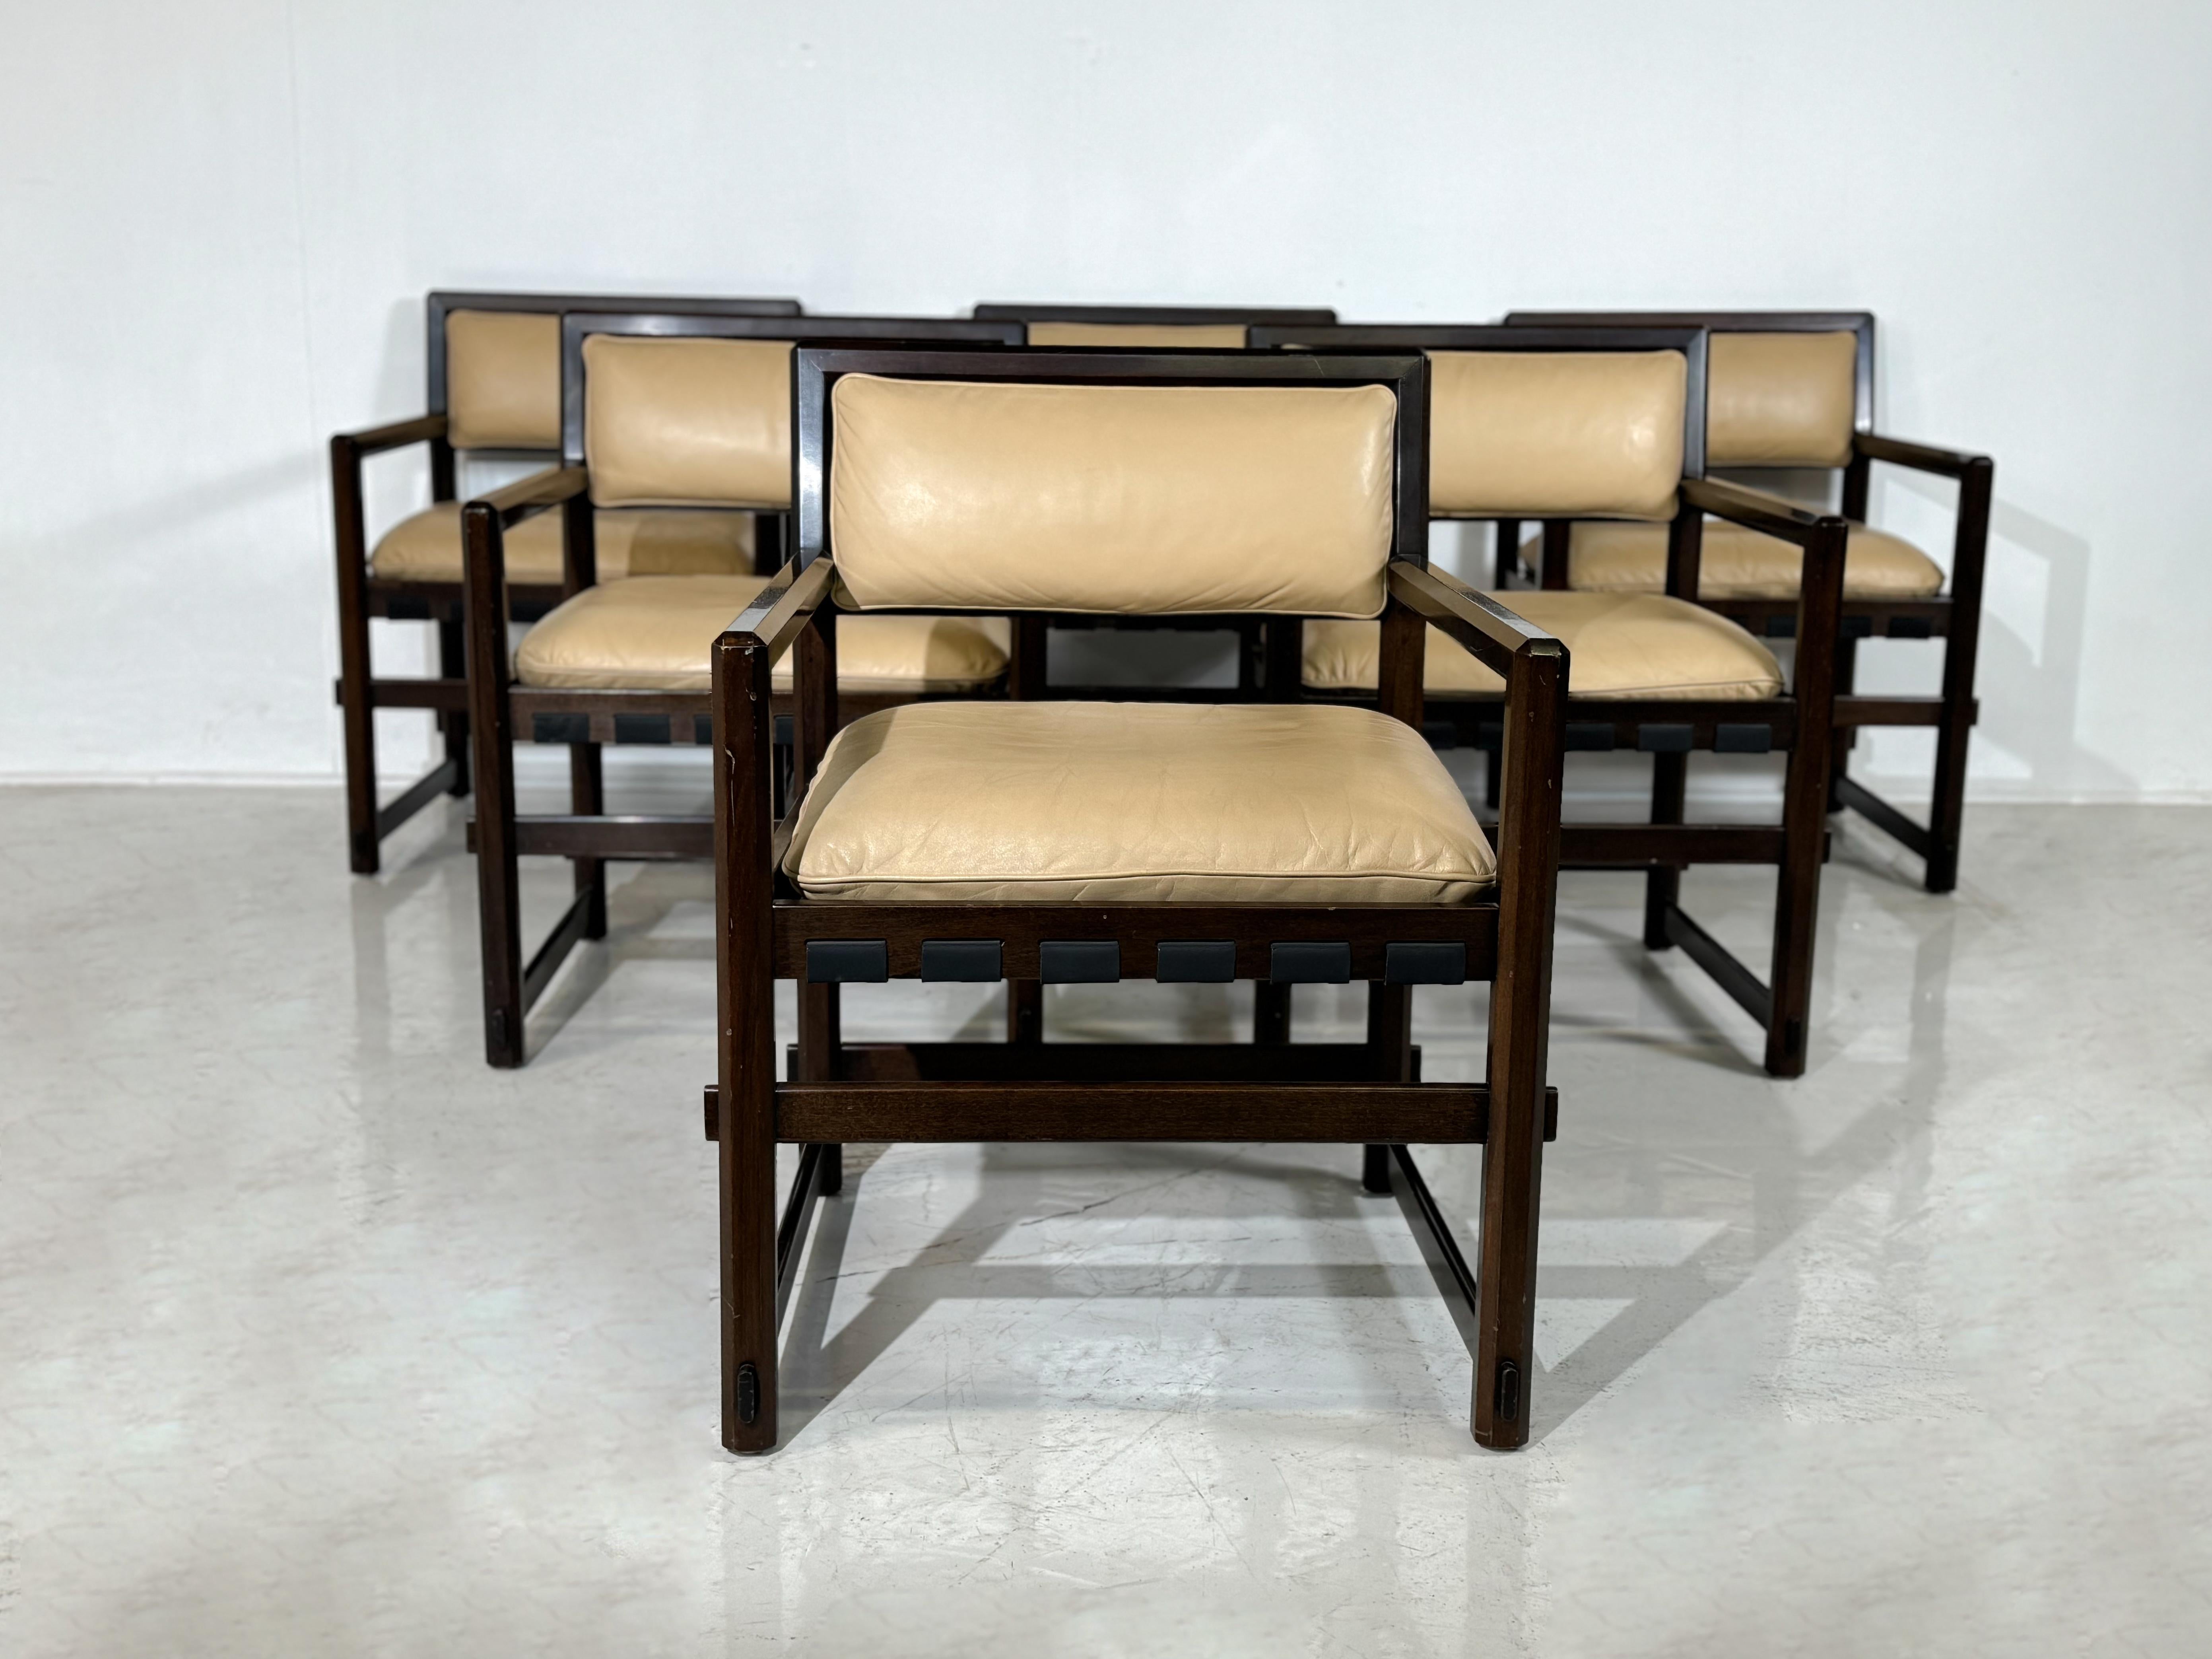 20th Century Mid-Century Modern Set of 6 Armchairs by Edward Wormley for Dunbar For Sale